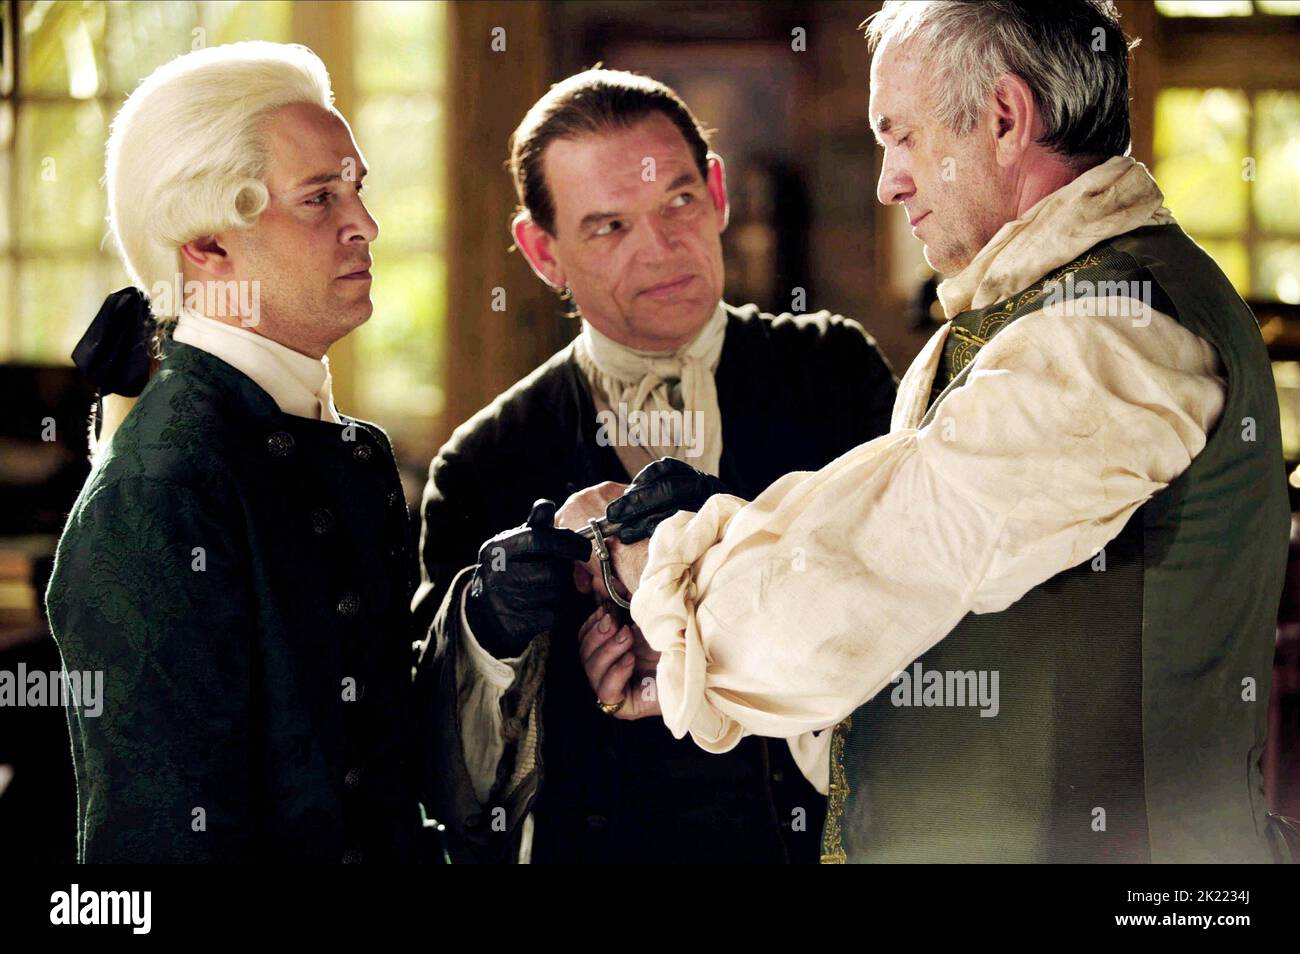 TOM HOLLANDER, DAVID SCHOFIELD, Jonathan Pryce, PIRATES OF THE CARIBBEAN : DEAD MAN'S CHEST, 2006 Banque D'Images